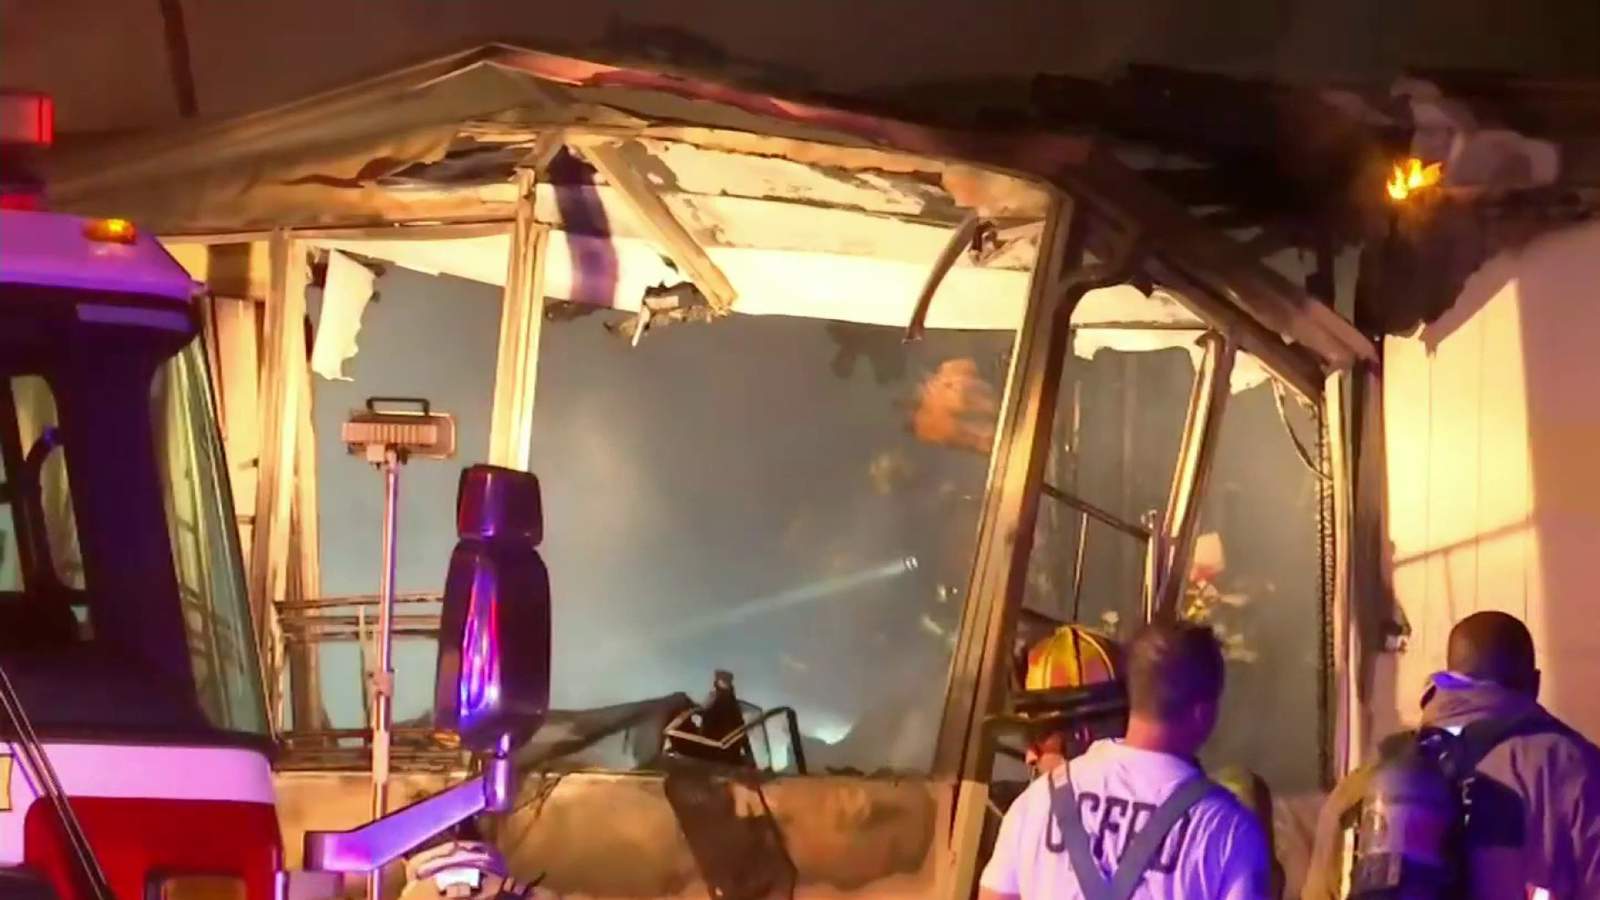 Victims in possibly suspicious fatal Orange County house fire identified